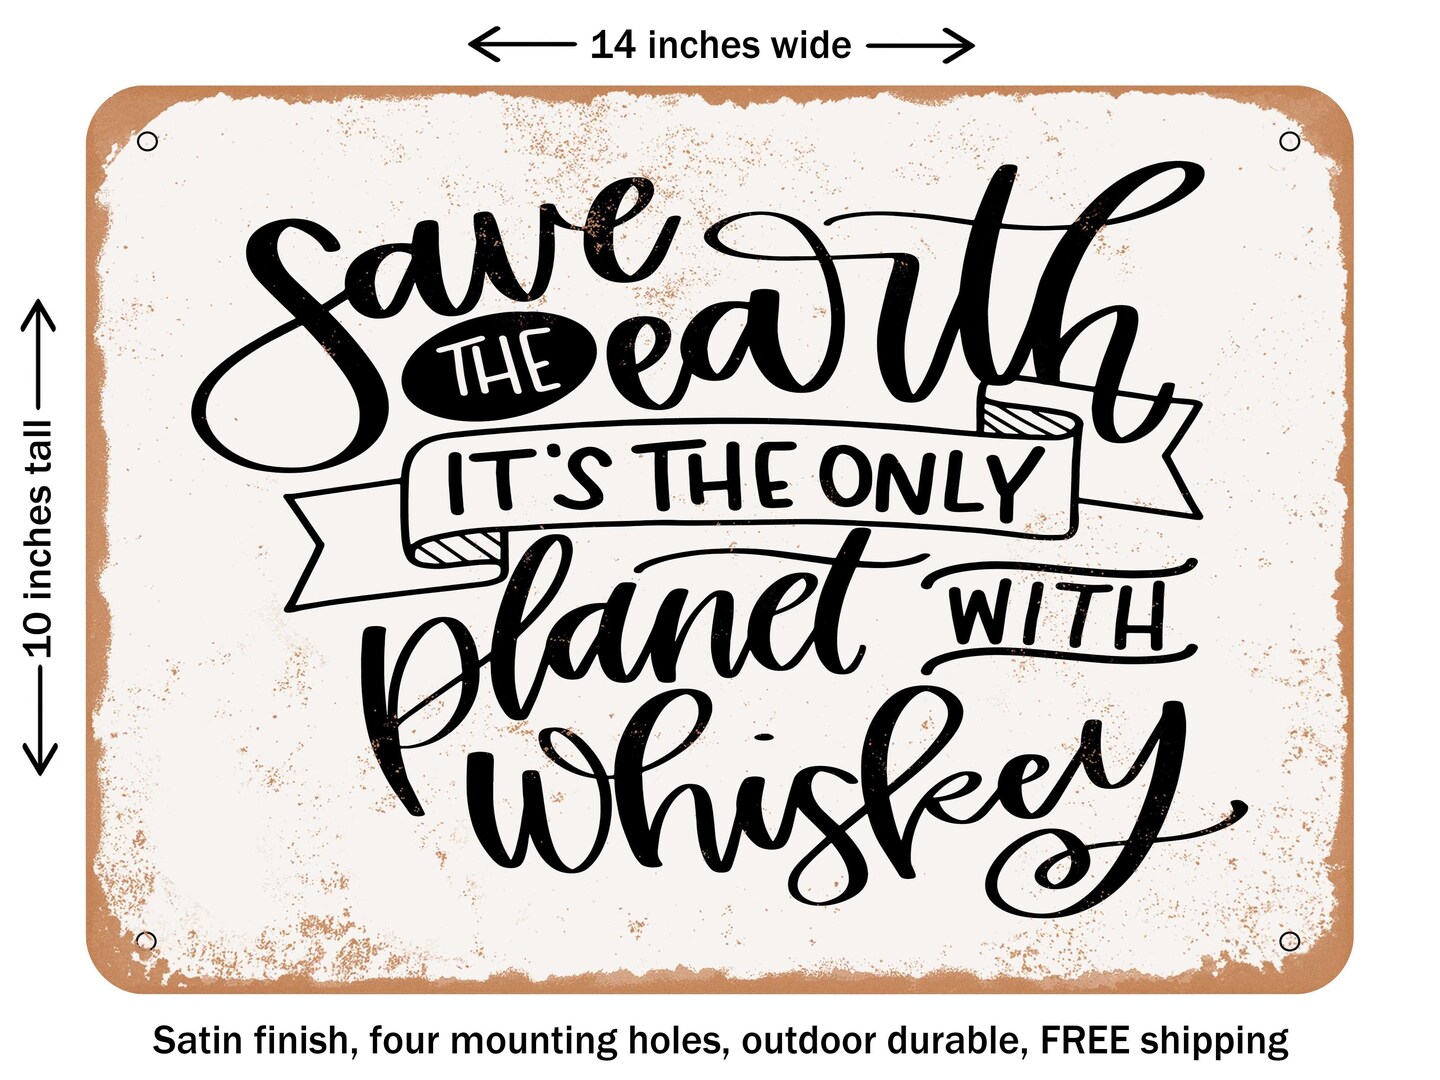 DECORATIVE METAL SIGN - Save the Earth Whiskey - Vintage Rusty Look